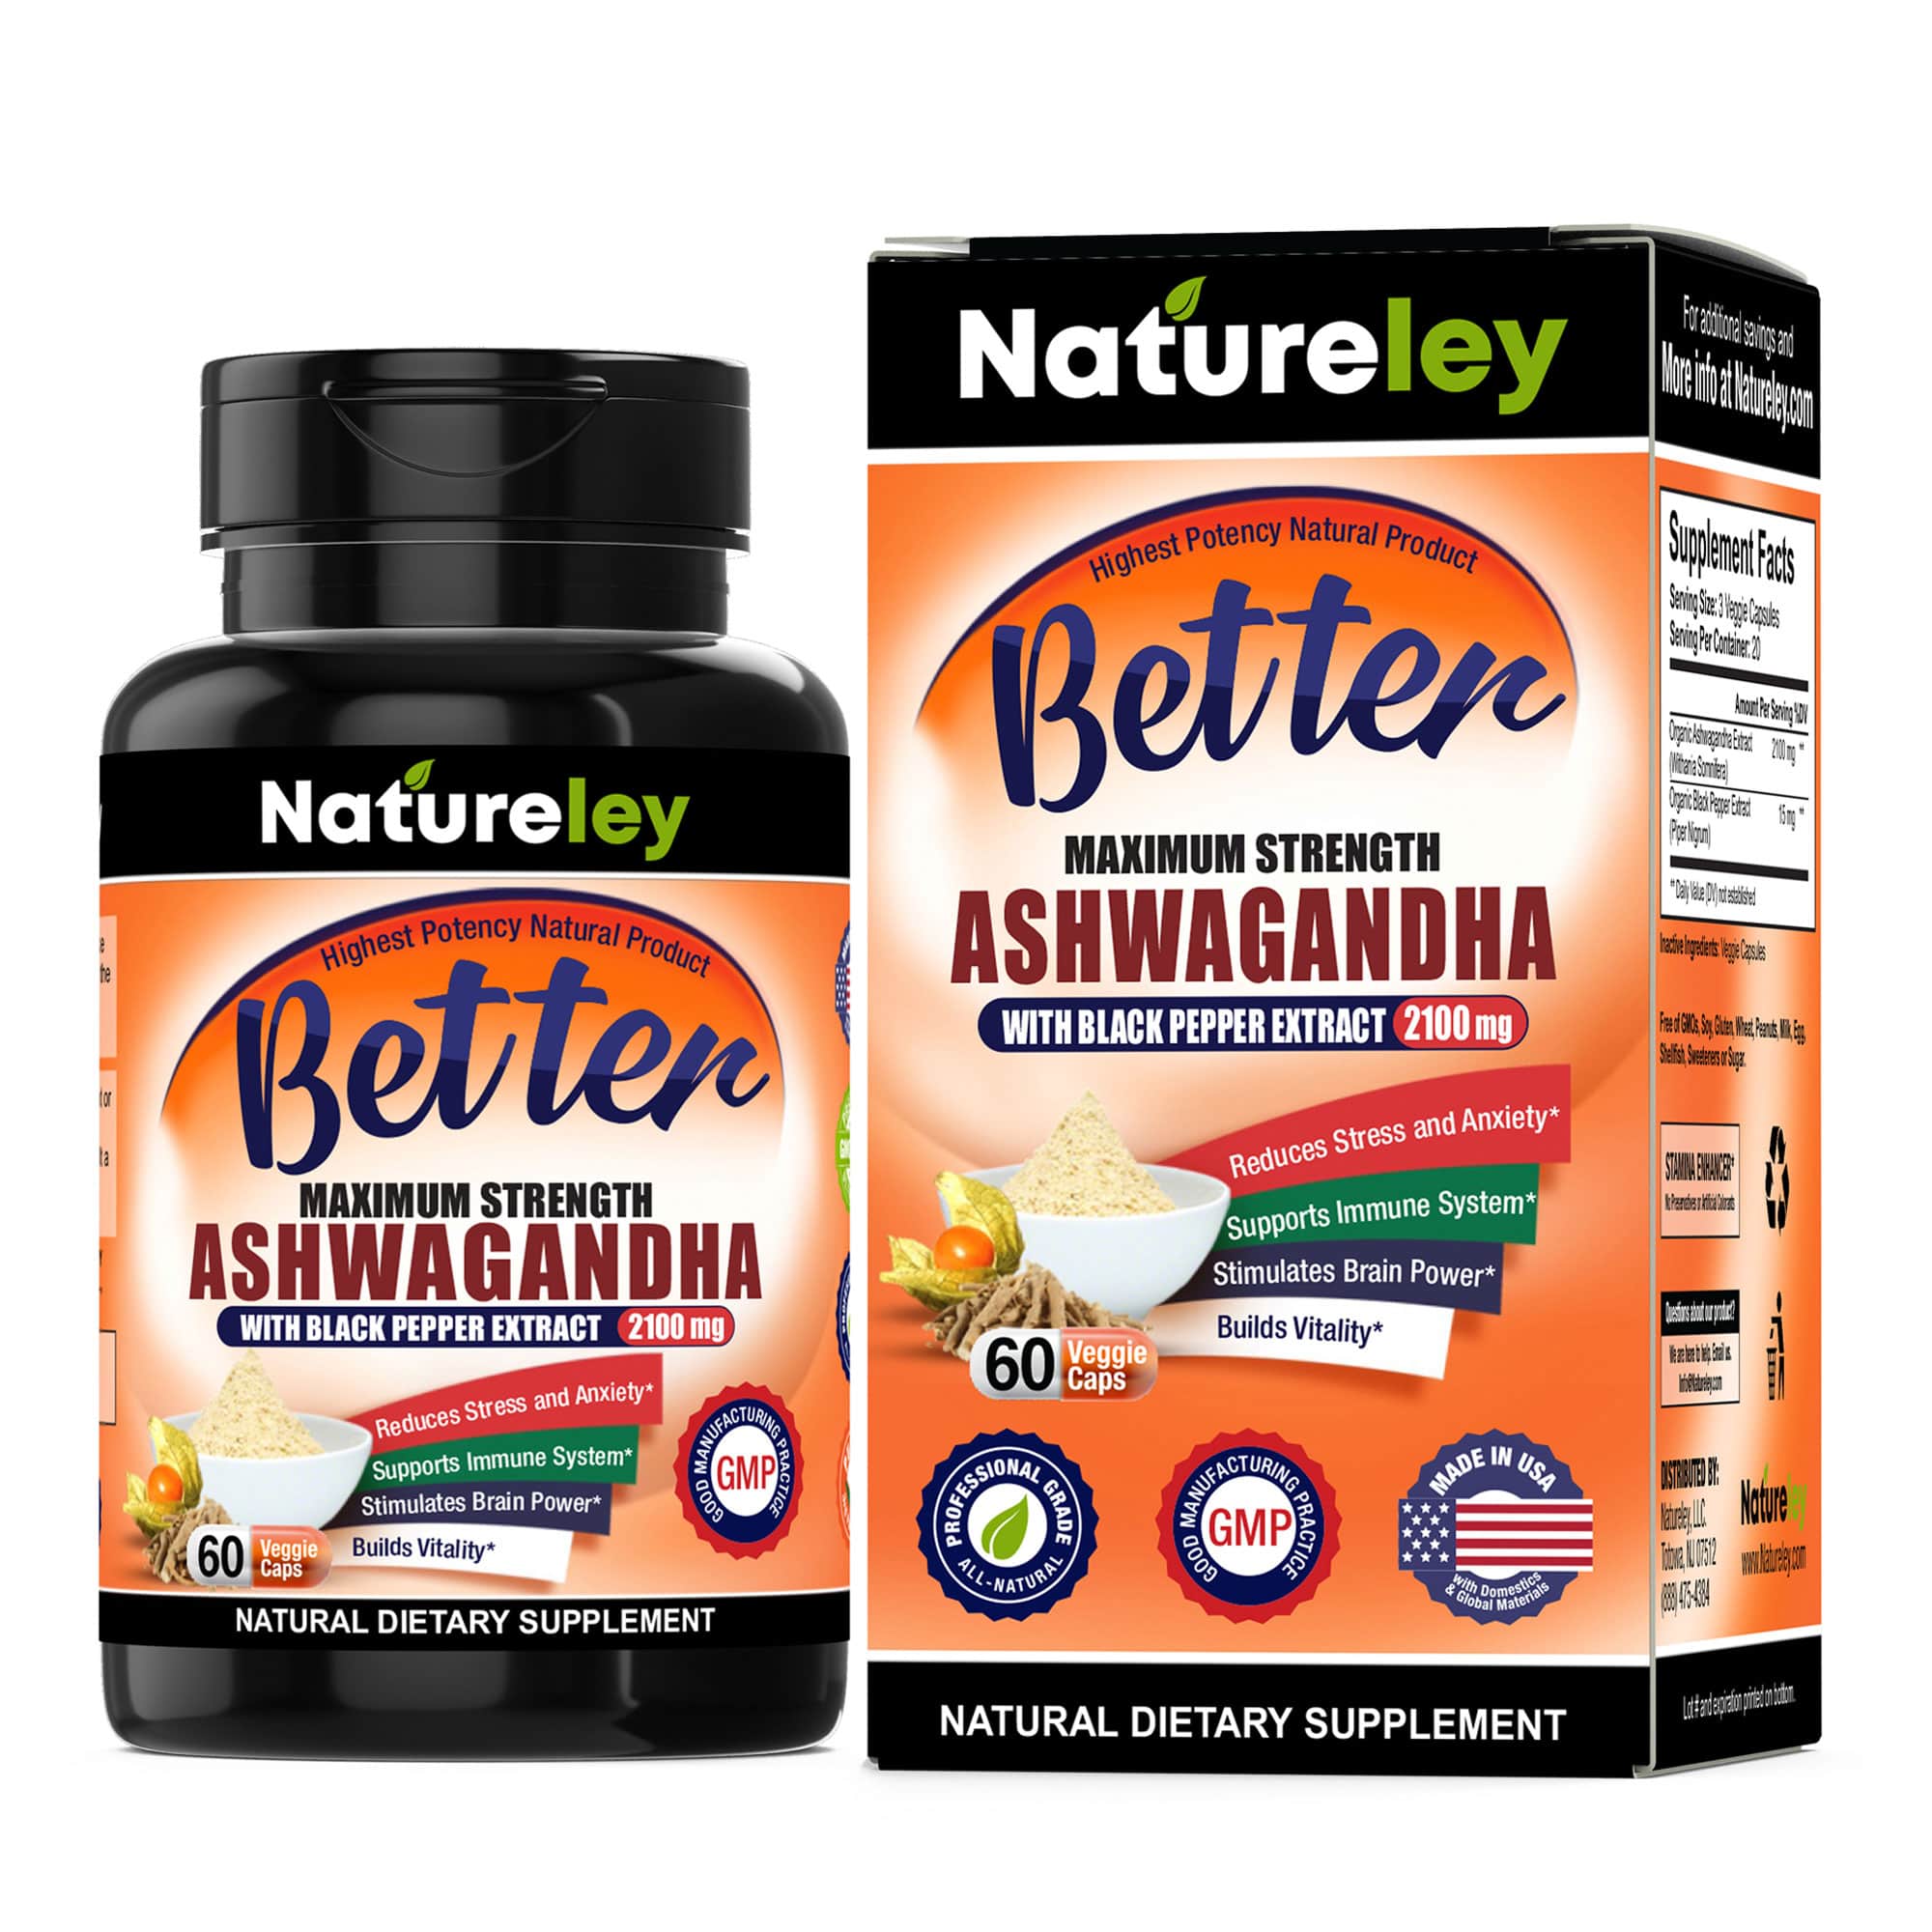 Organic Ashwagandha with Black Pepper Extract - 2100 mg 60 Caps